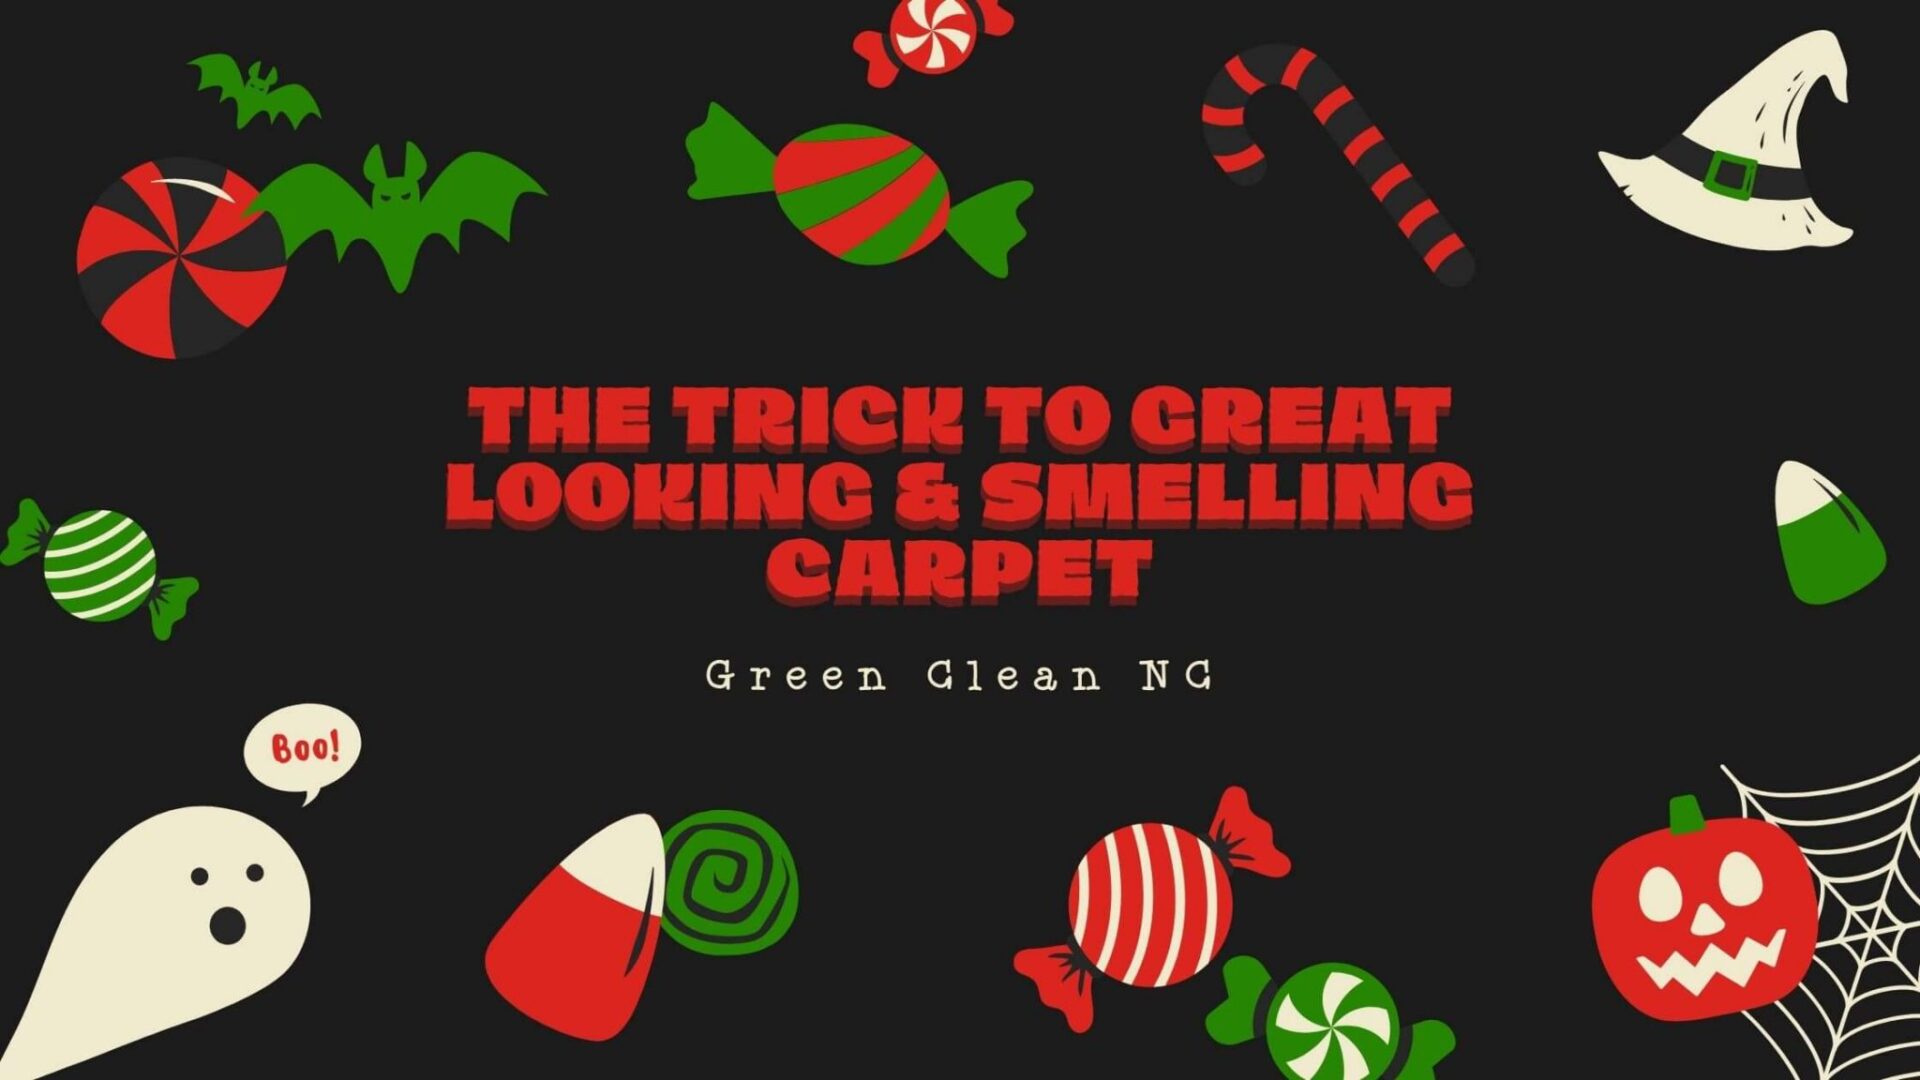 The Trick to Great Looking & Smelling Carpet